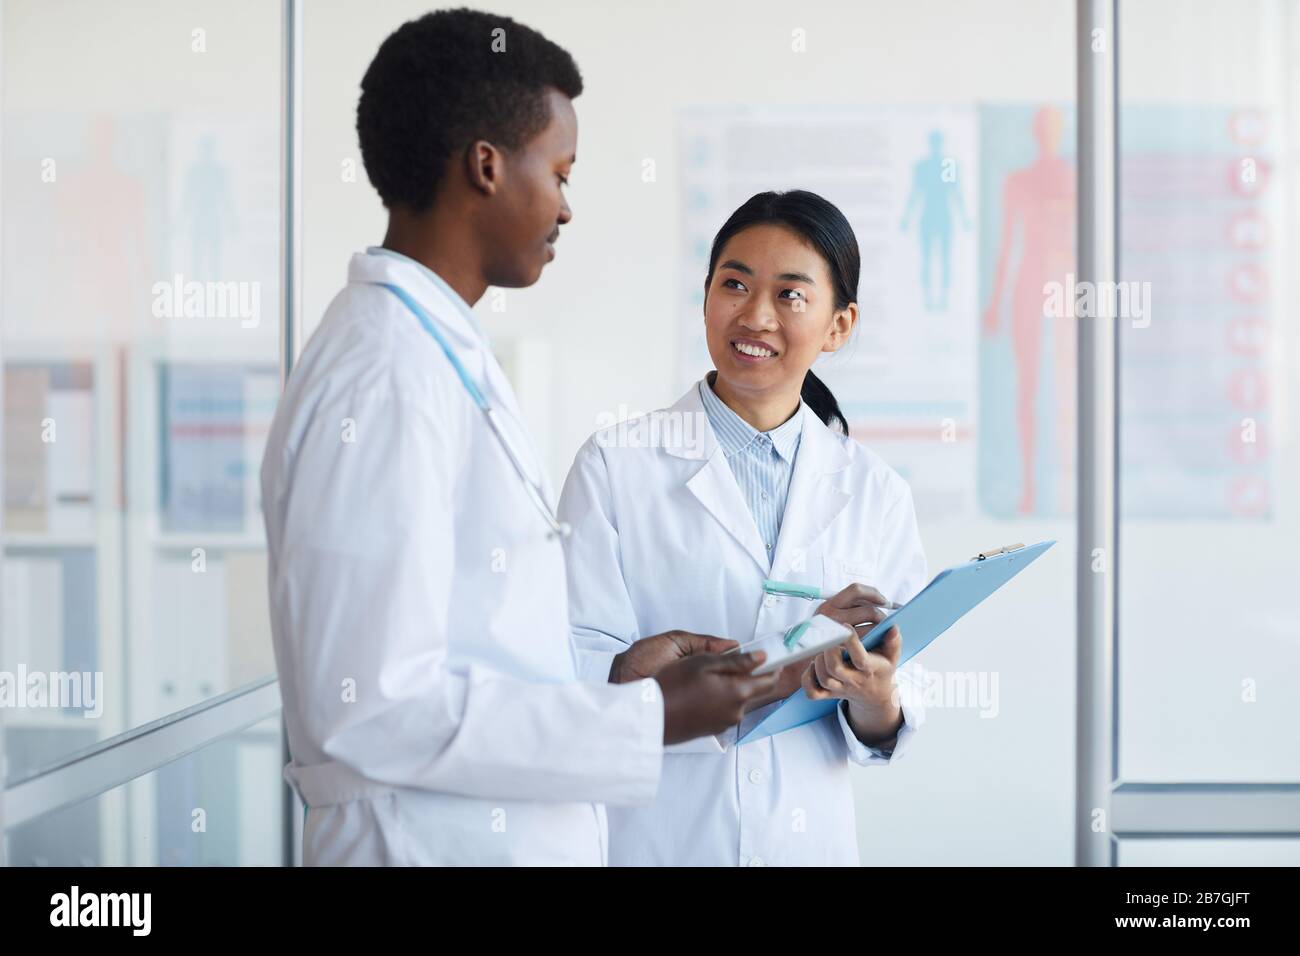 Waist up portrait of young African-American doctor talking to female colleague in medical office interior, copy space Stock Photo